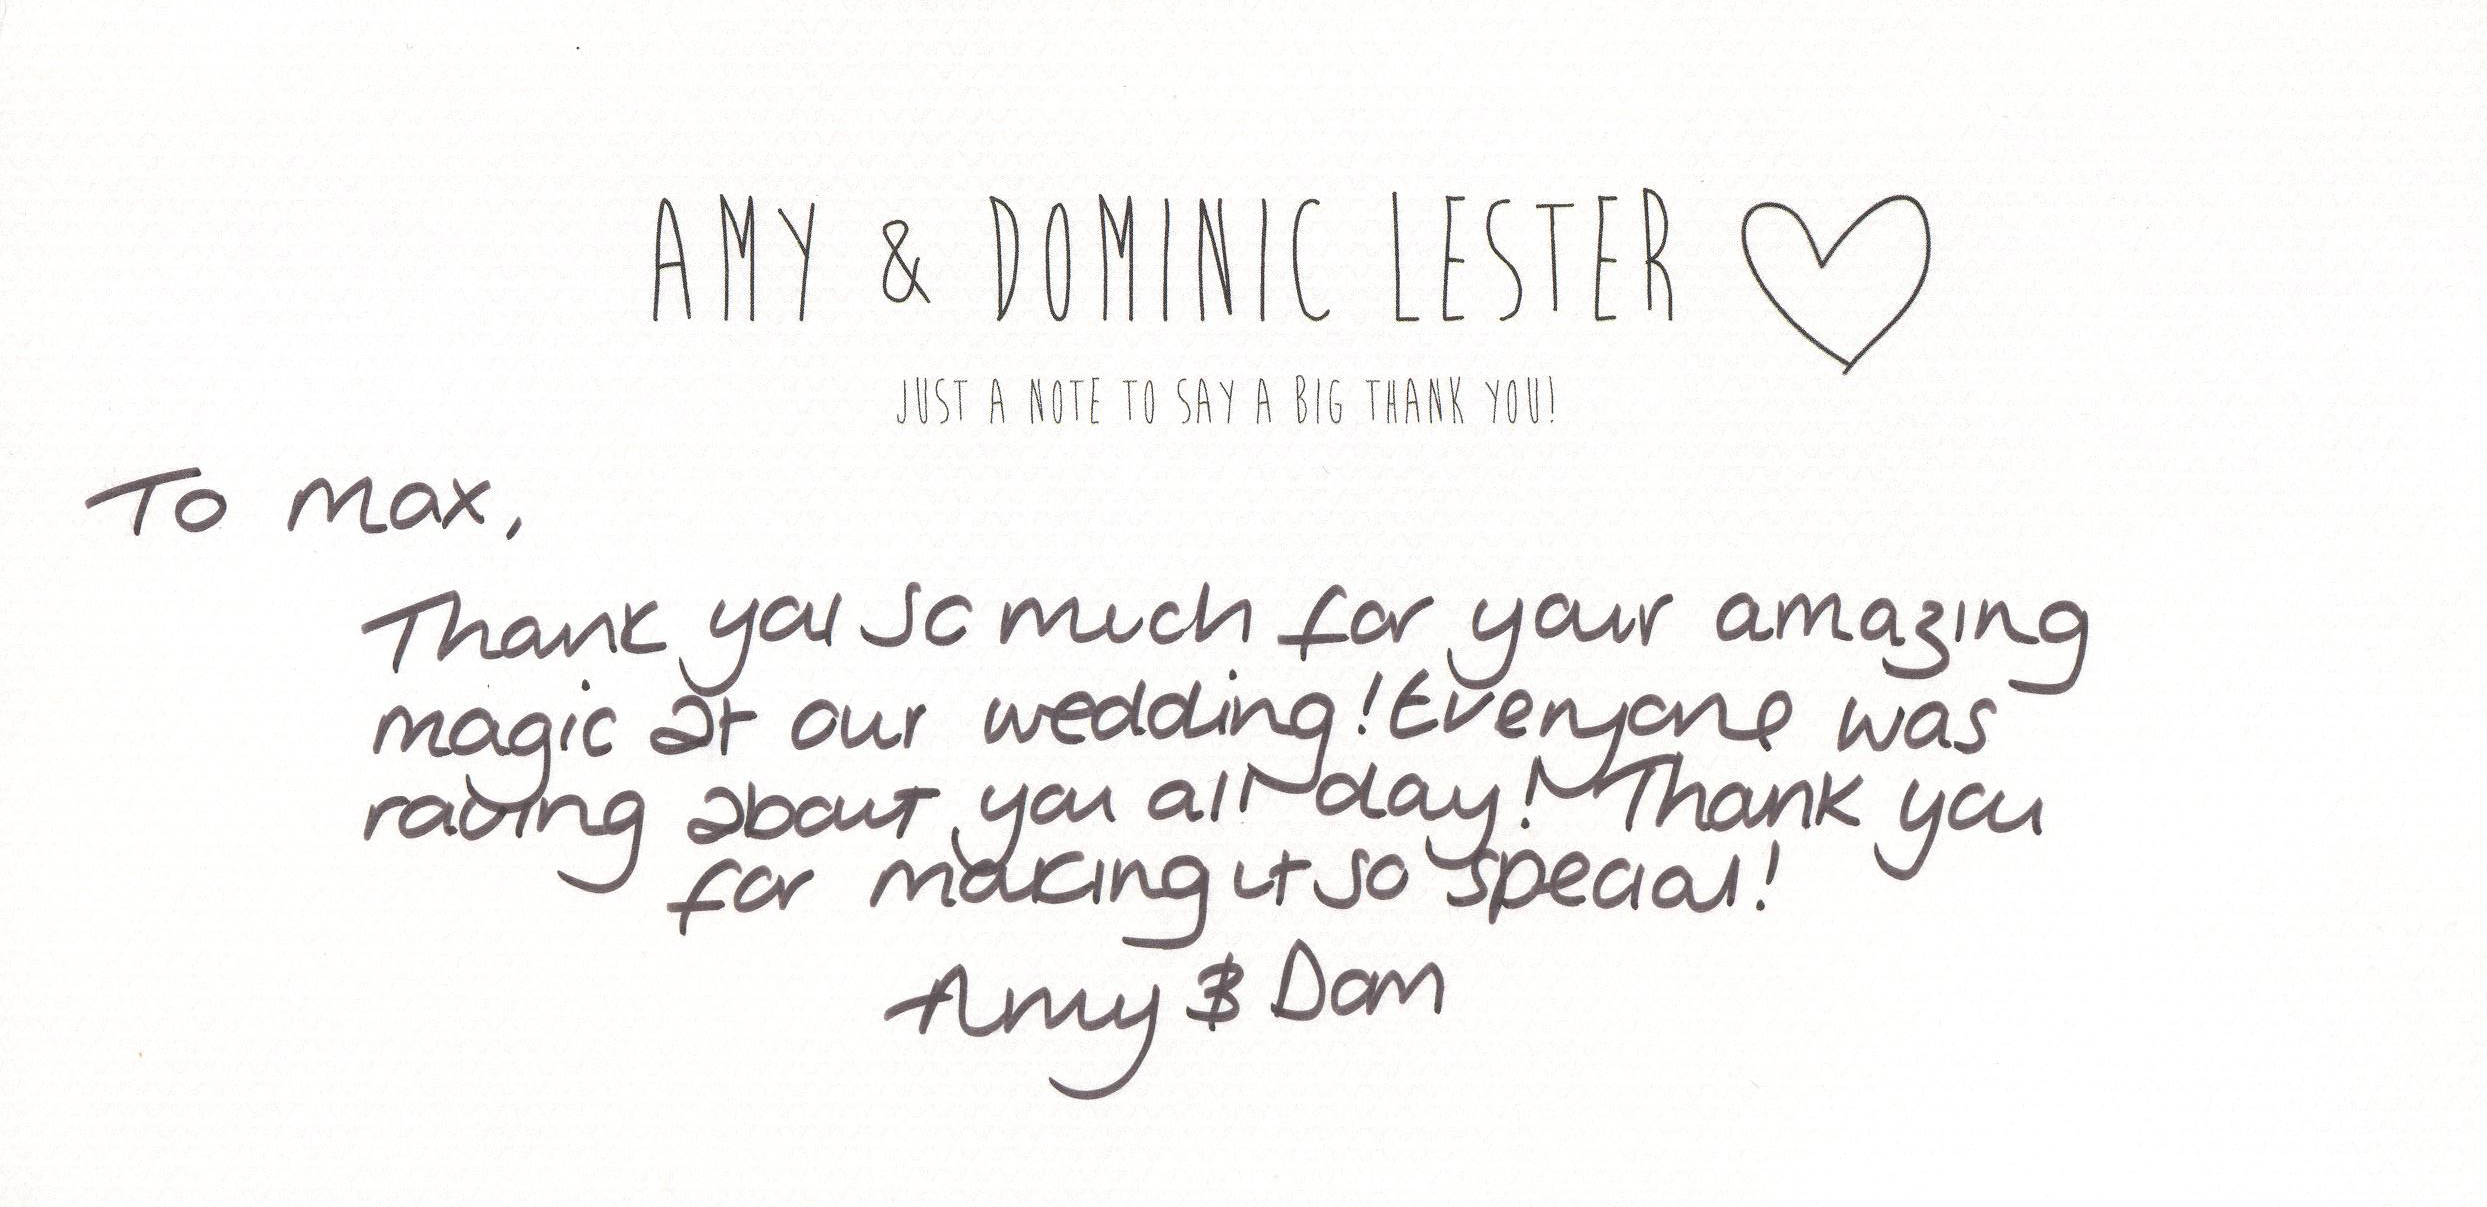 To max, Thank you so much for your amazing magic at our wedding! Everyone was raving about you all day! Thank you for making it so special! Amy & Dom